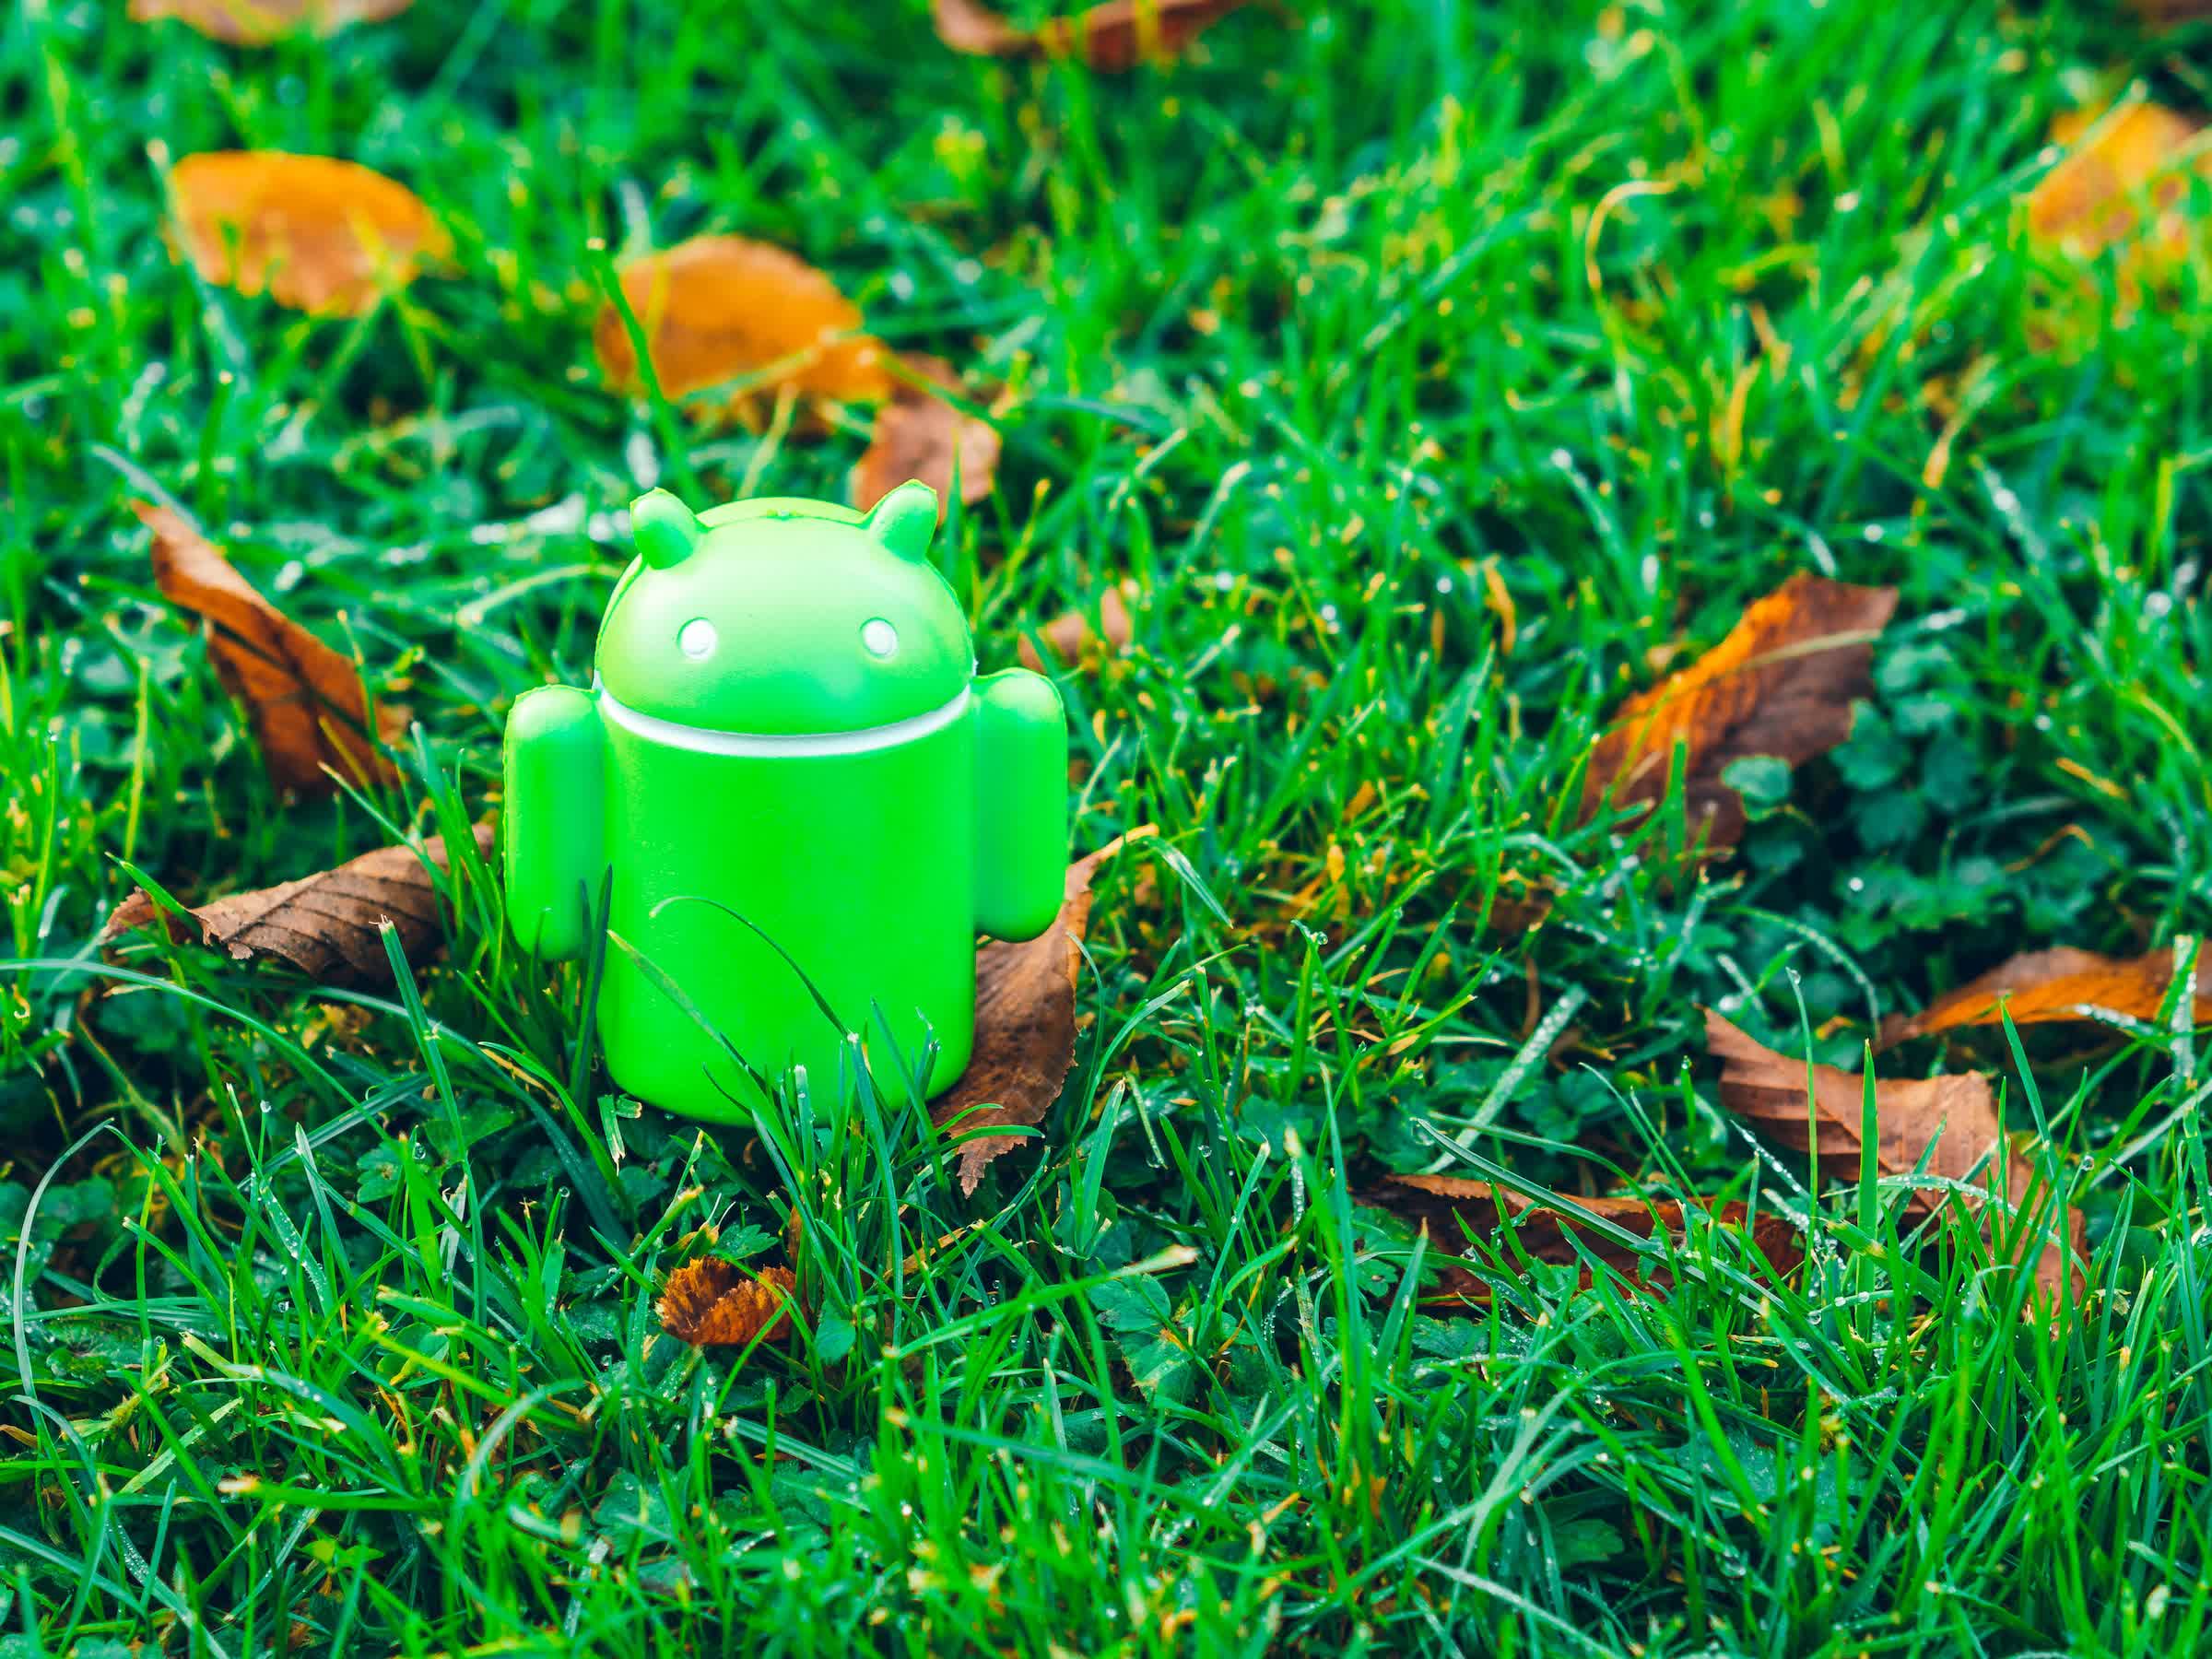 Google reveals bug bounty program for its own Android apps like Chrome, Gmail and the search widget